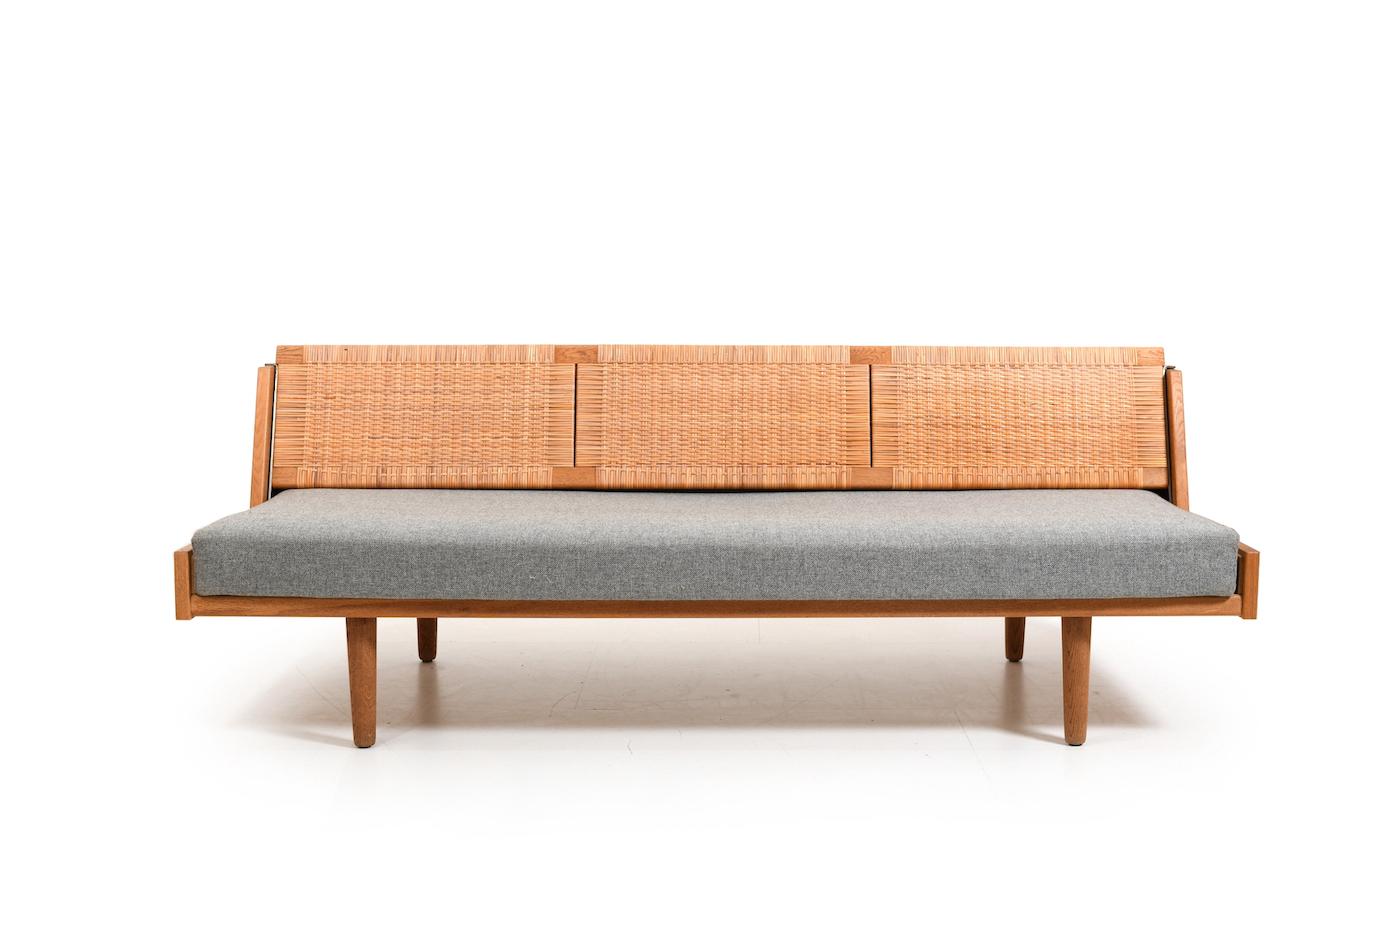 Daybed GE-258 in oak by Hans J. Wegner for Getama Denmark 1954. Backrest in wicker cane. Original mattress with grey fabric. Early production 1950s. with beatiful patina and round legs.